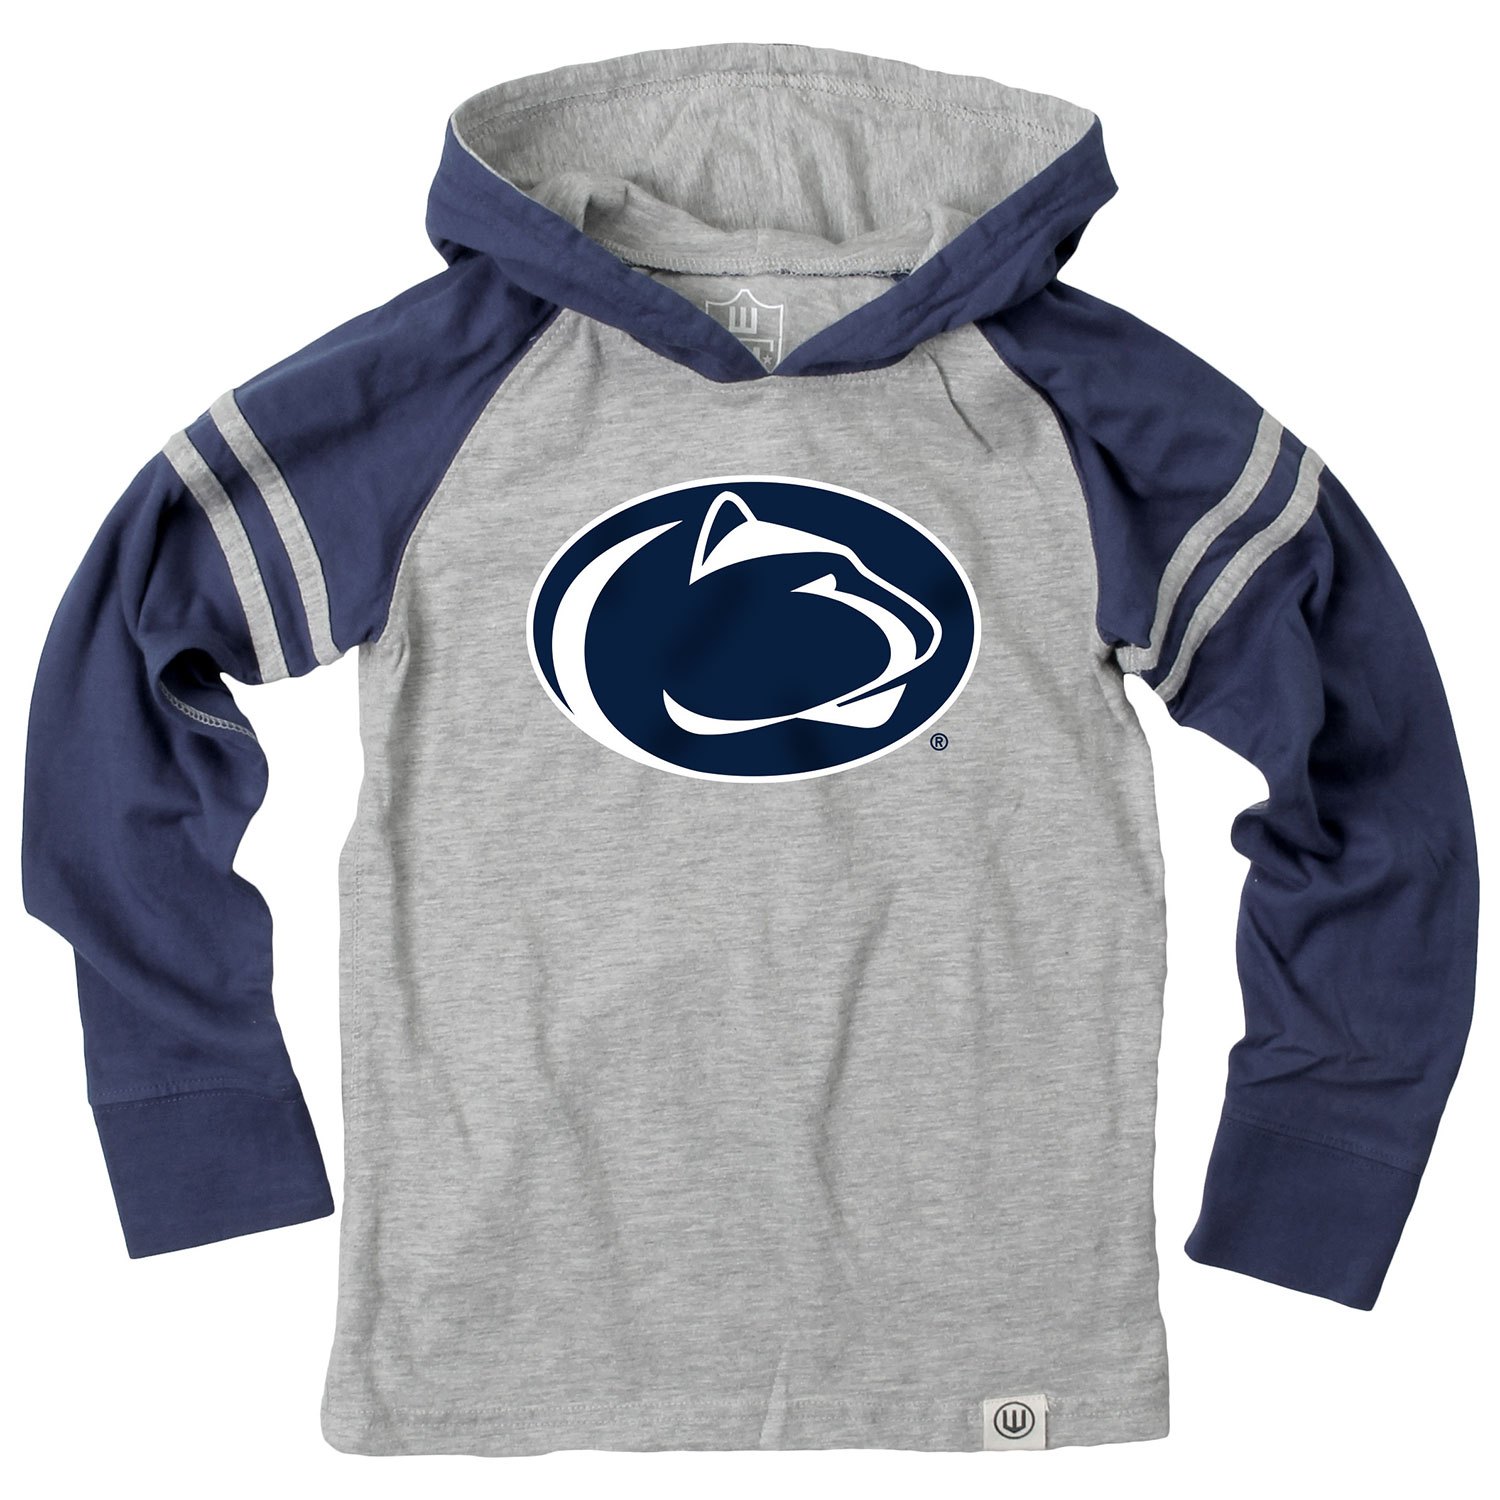 Wes And Willy Penn State Nittany Lions Youth Boys Long Sleeve Striped Hooded T-Shirt